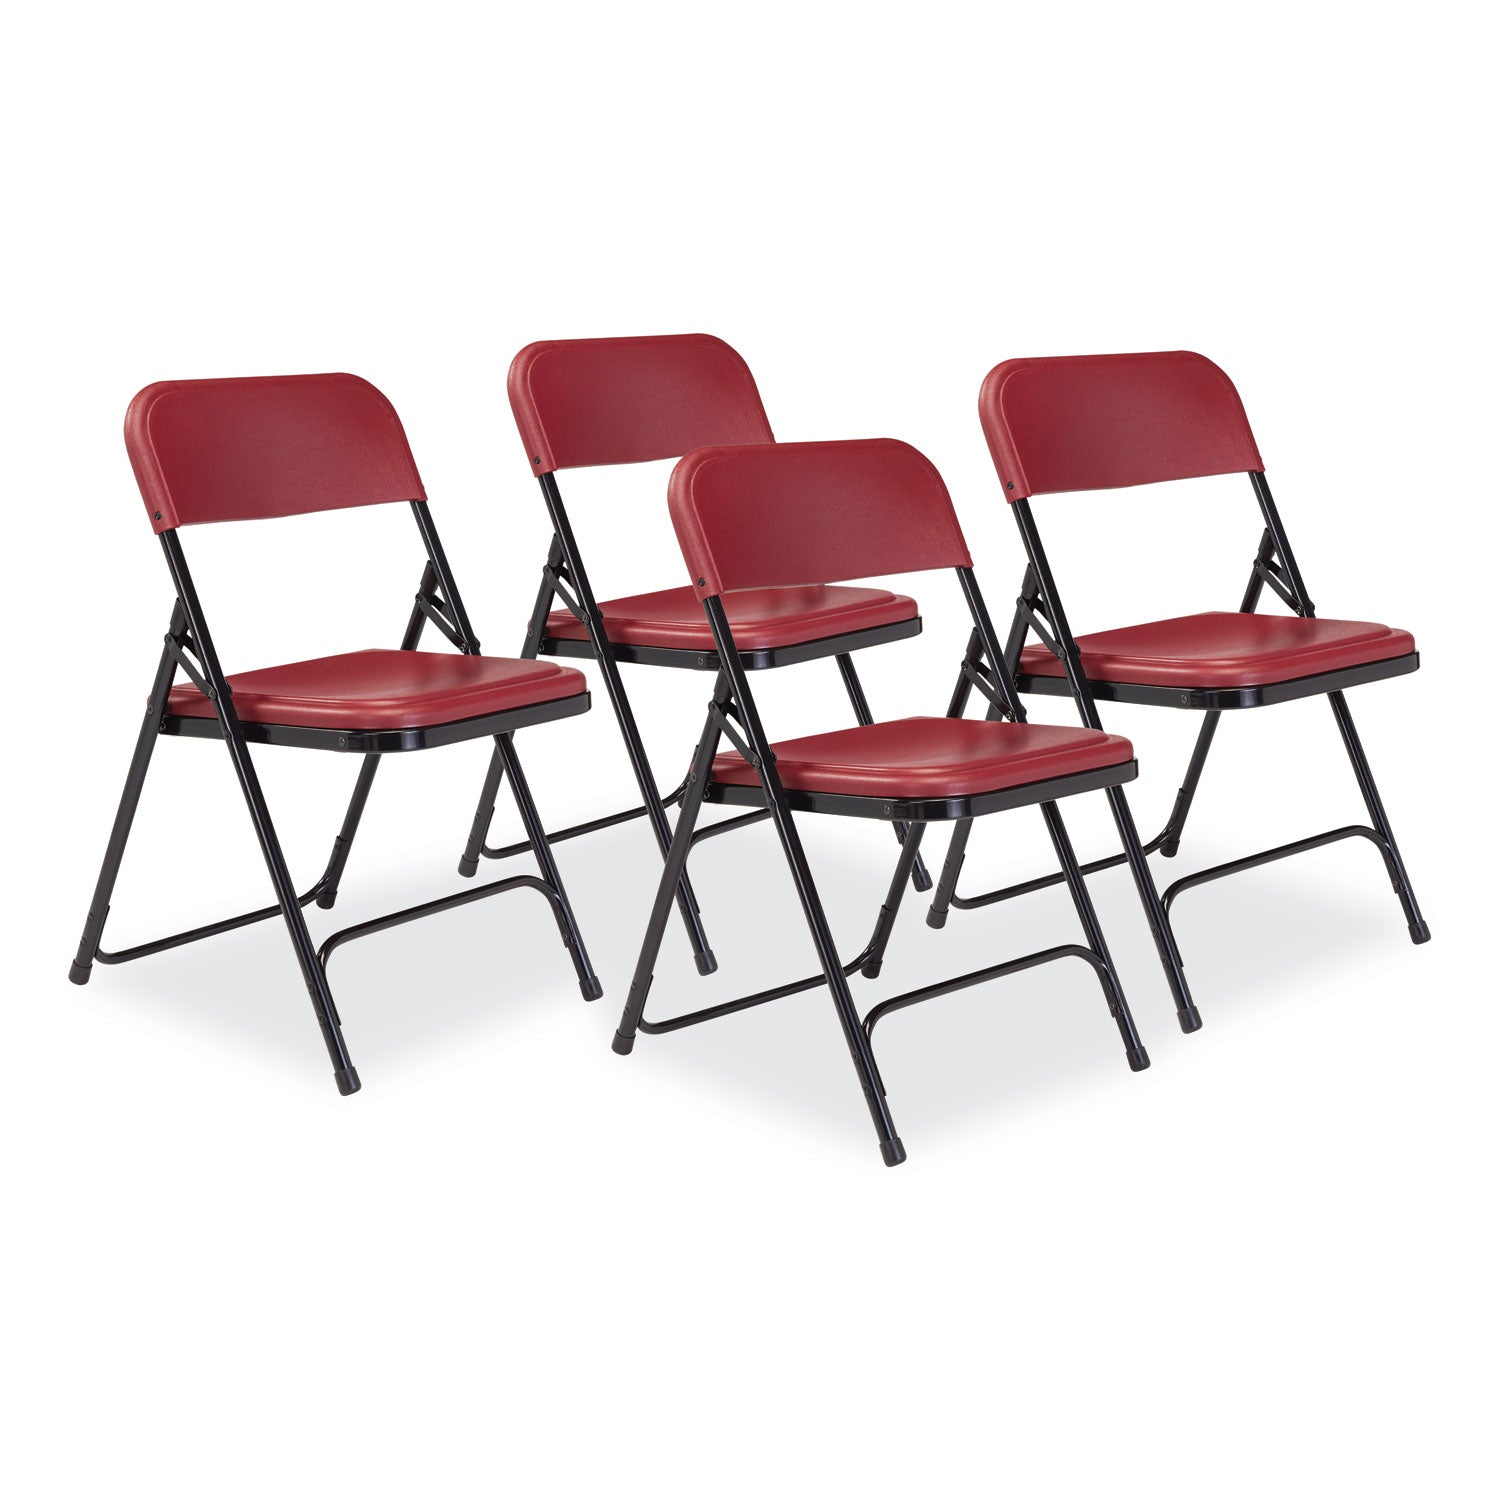 800-series-plastic-folding-chair-supports-500-lb-18-seat-ht-burgundy-seat-back-black-base-4-ct-ships-in-1-3-bus-days_nps818 - 1